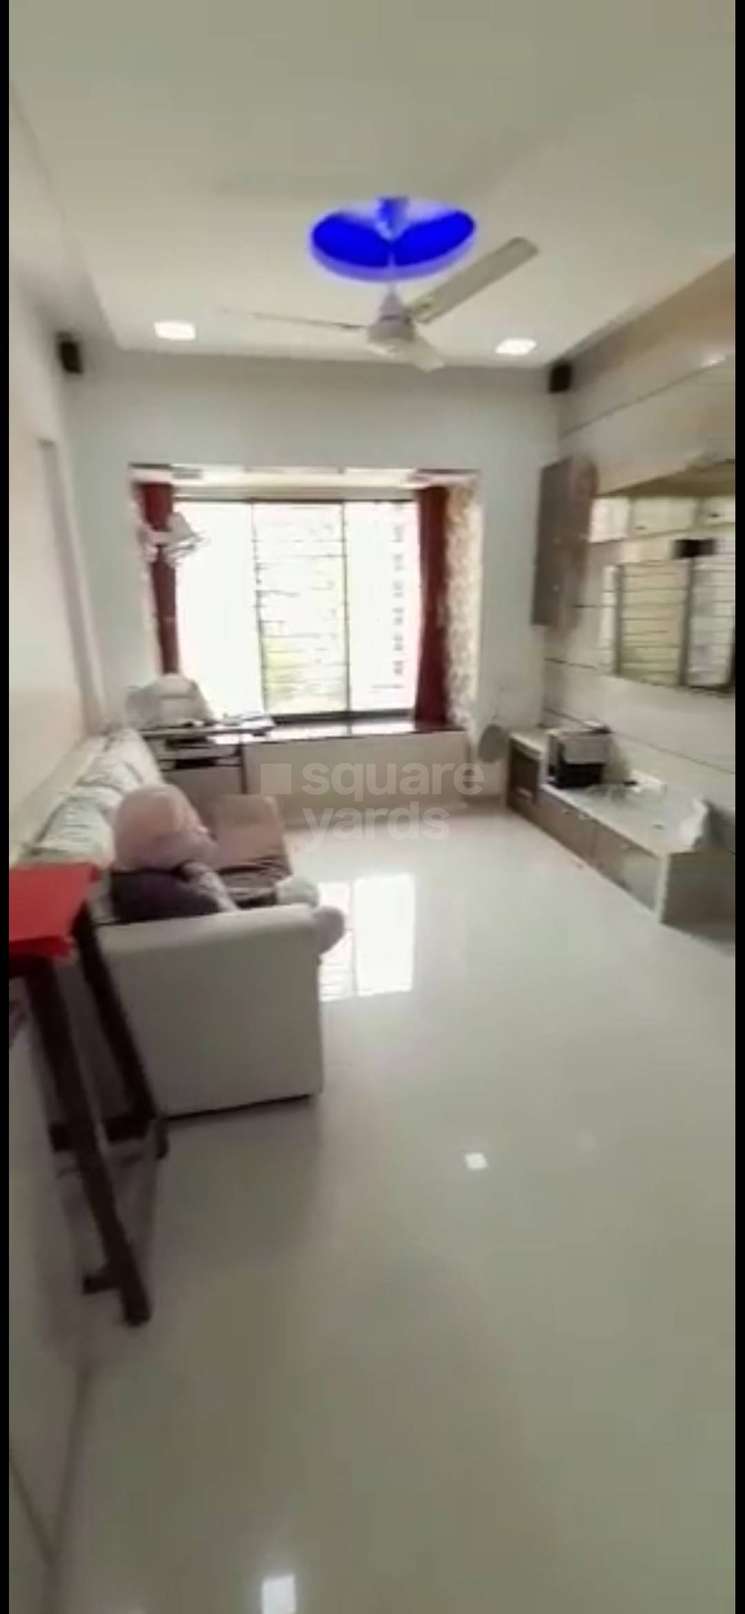 2 Bedroom 650 Sq.Ft. Apartment in Anand Nagar Thane